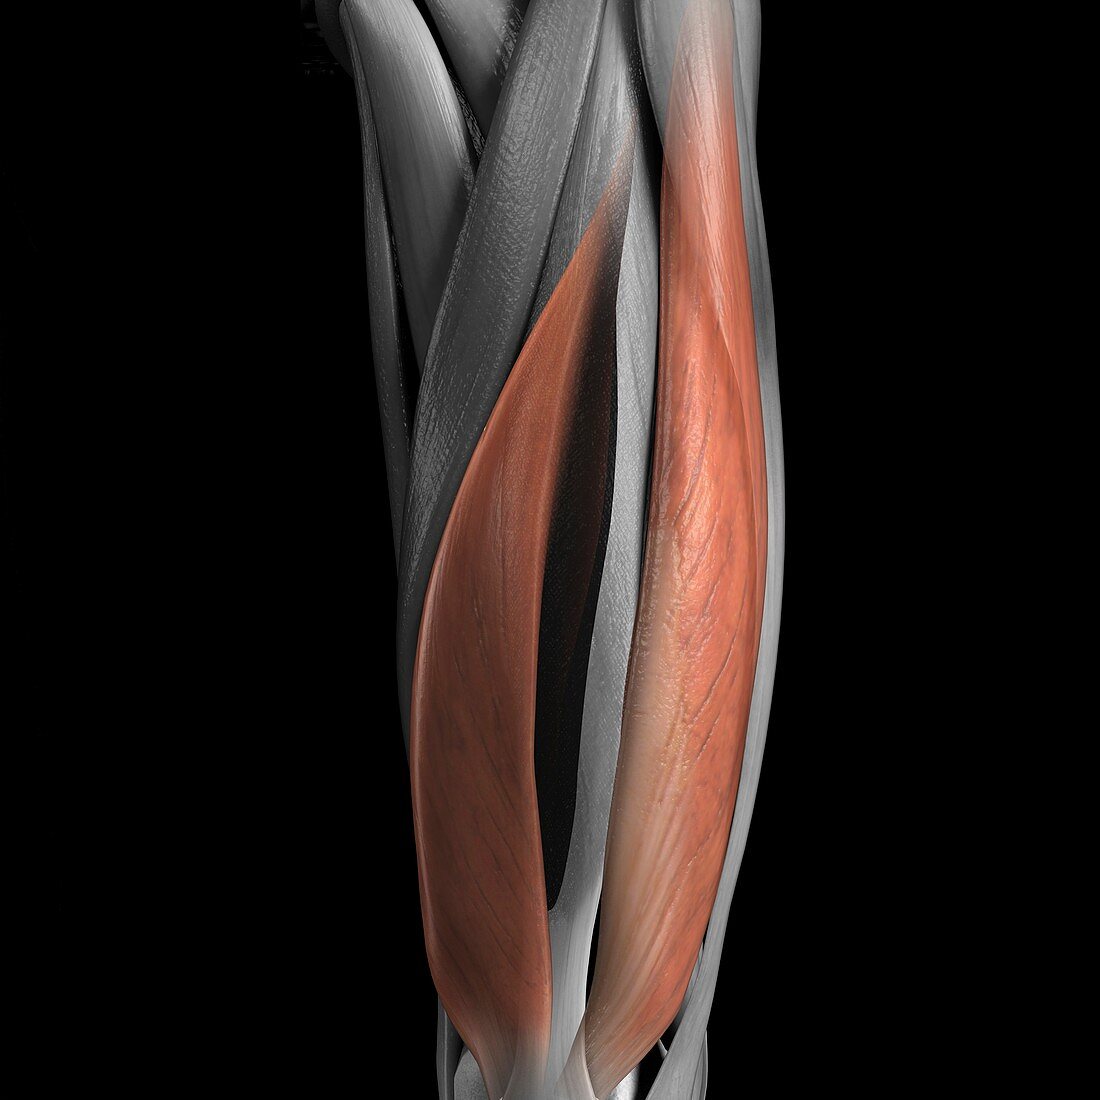 Vastus Medialis and Lateralis Muscles